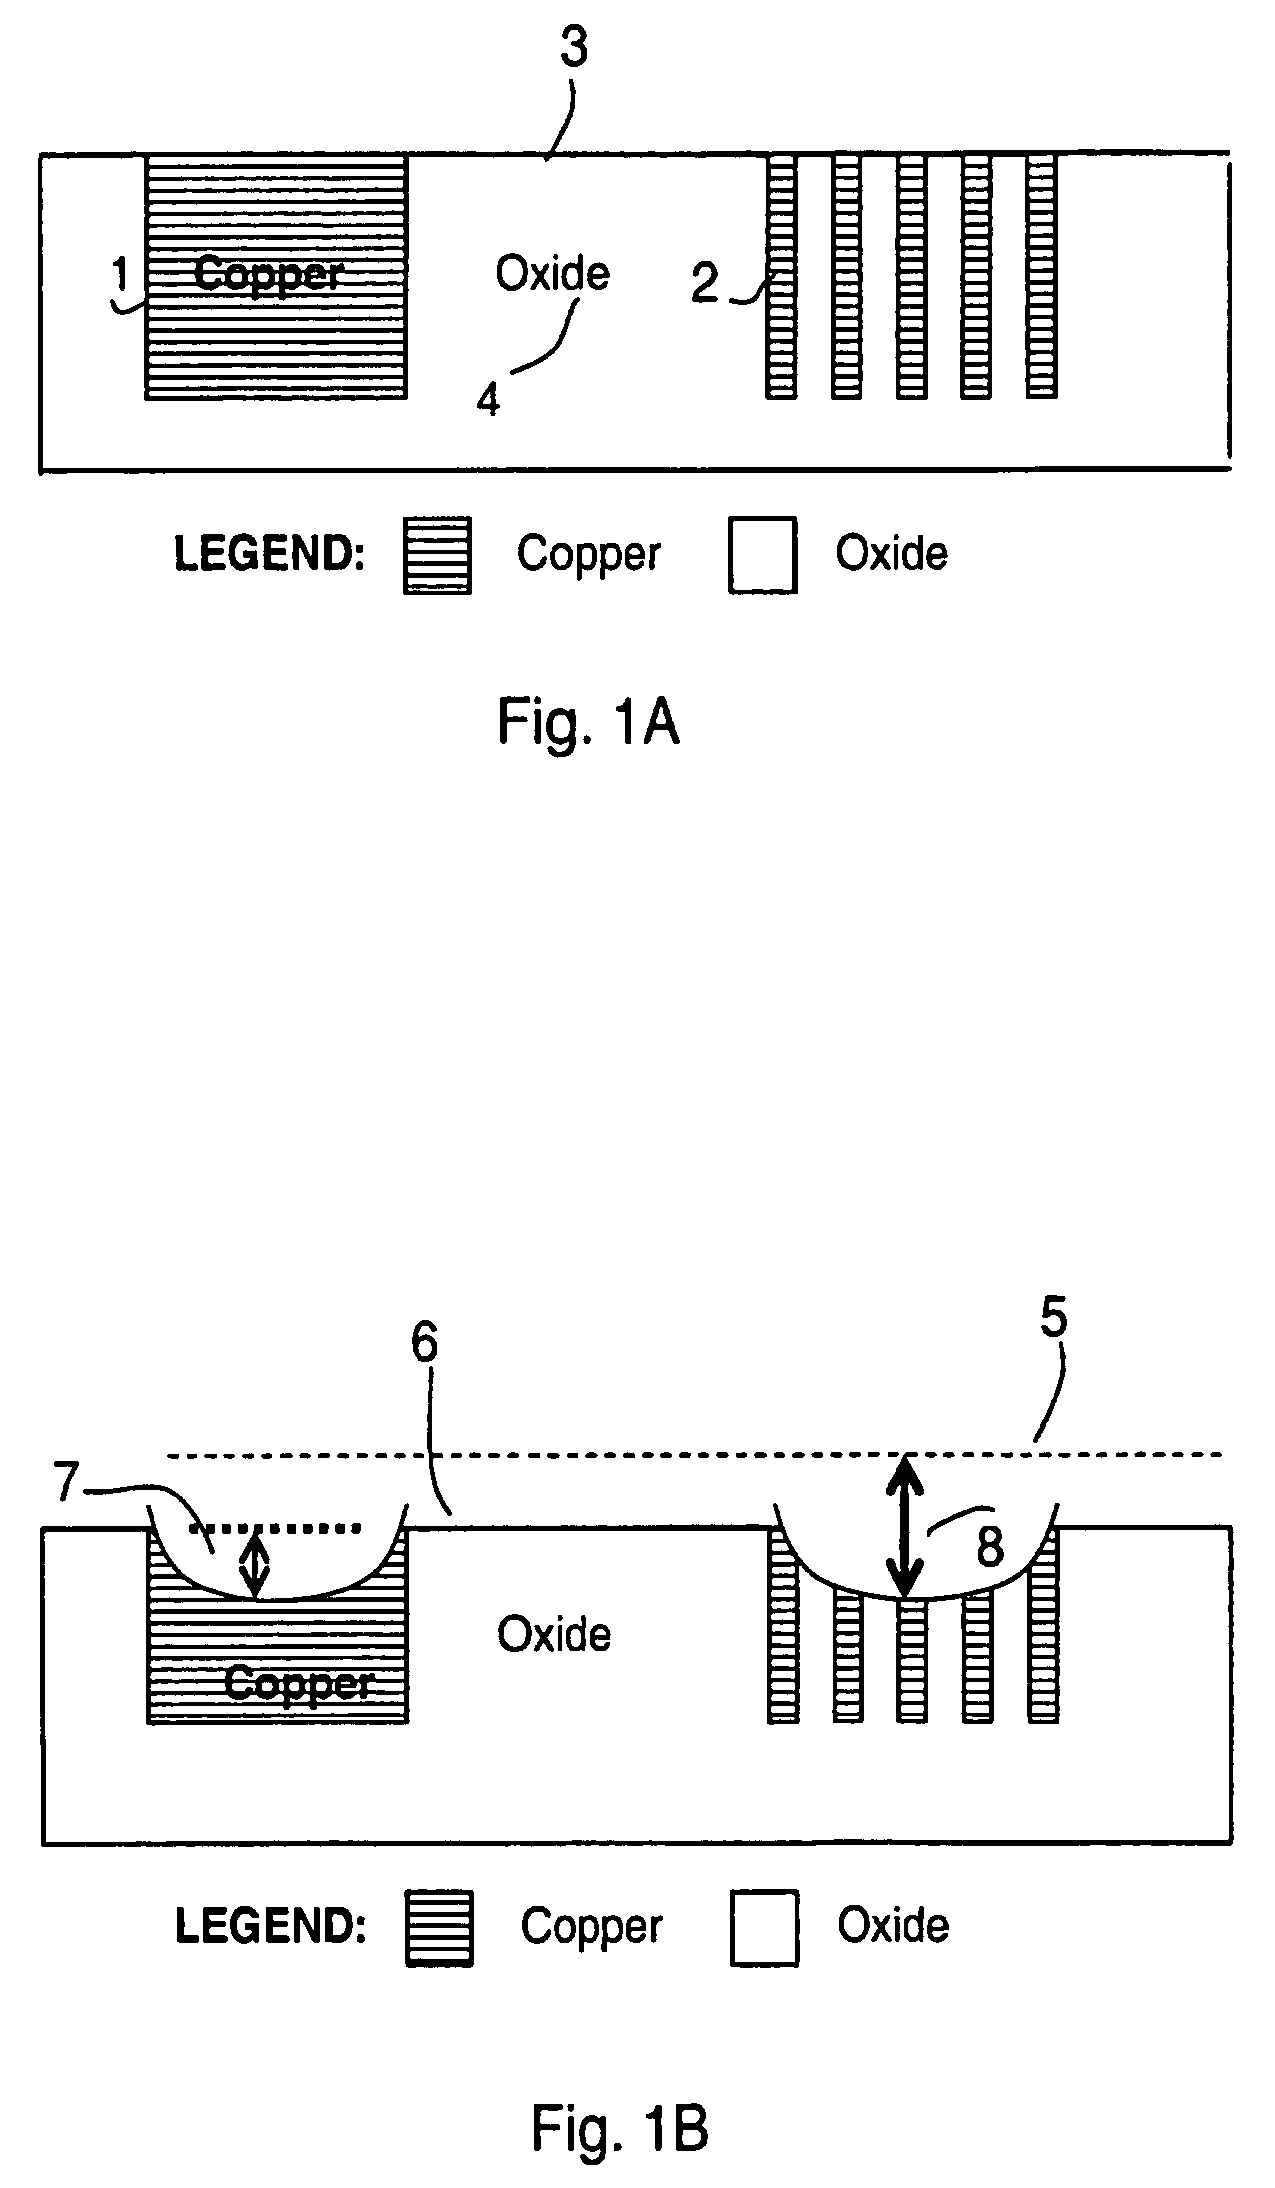 Methods and systems for implementing dummy fill for integrated circuits